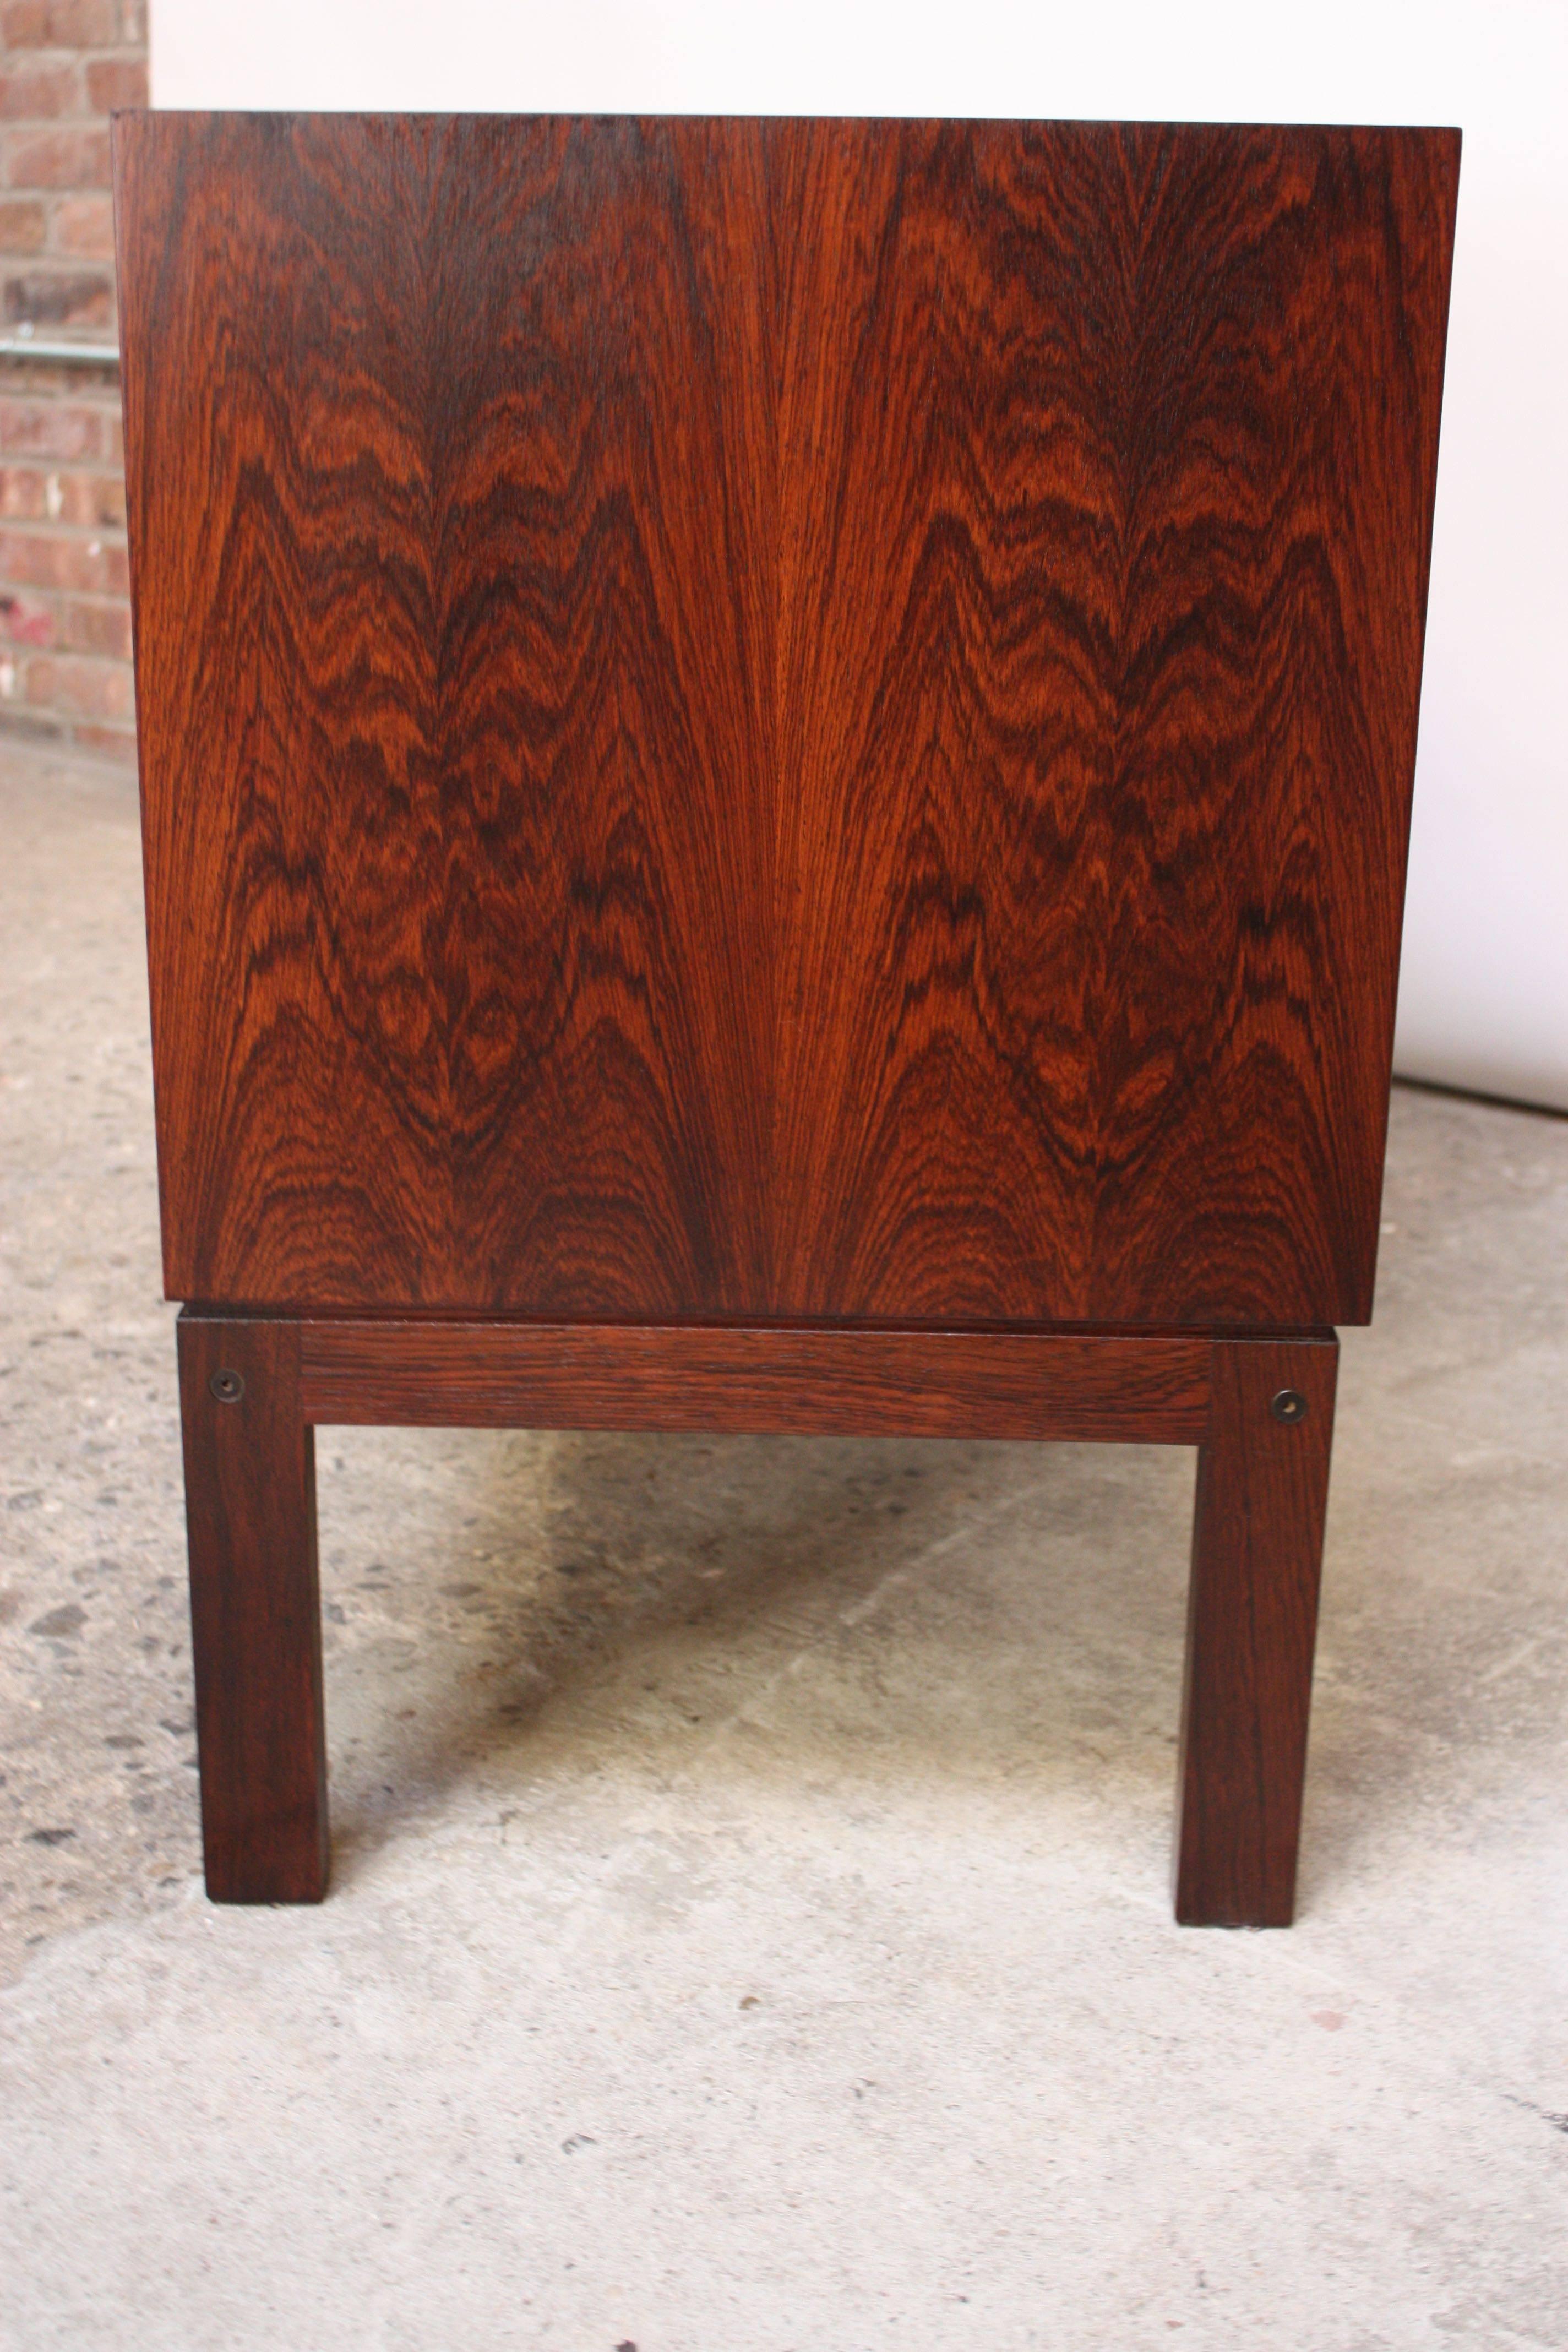 Mid-20th Century Petite Danish Modern Bookmatched Rosewood Cabinet